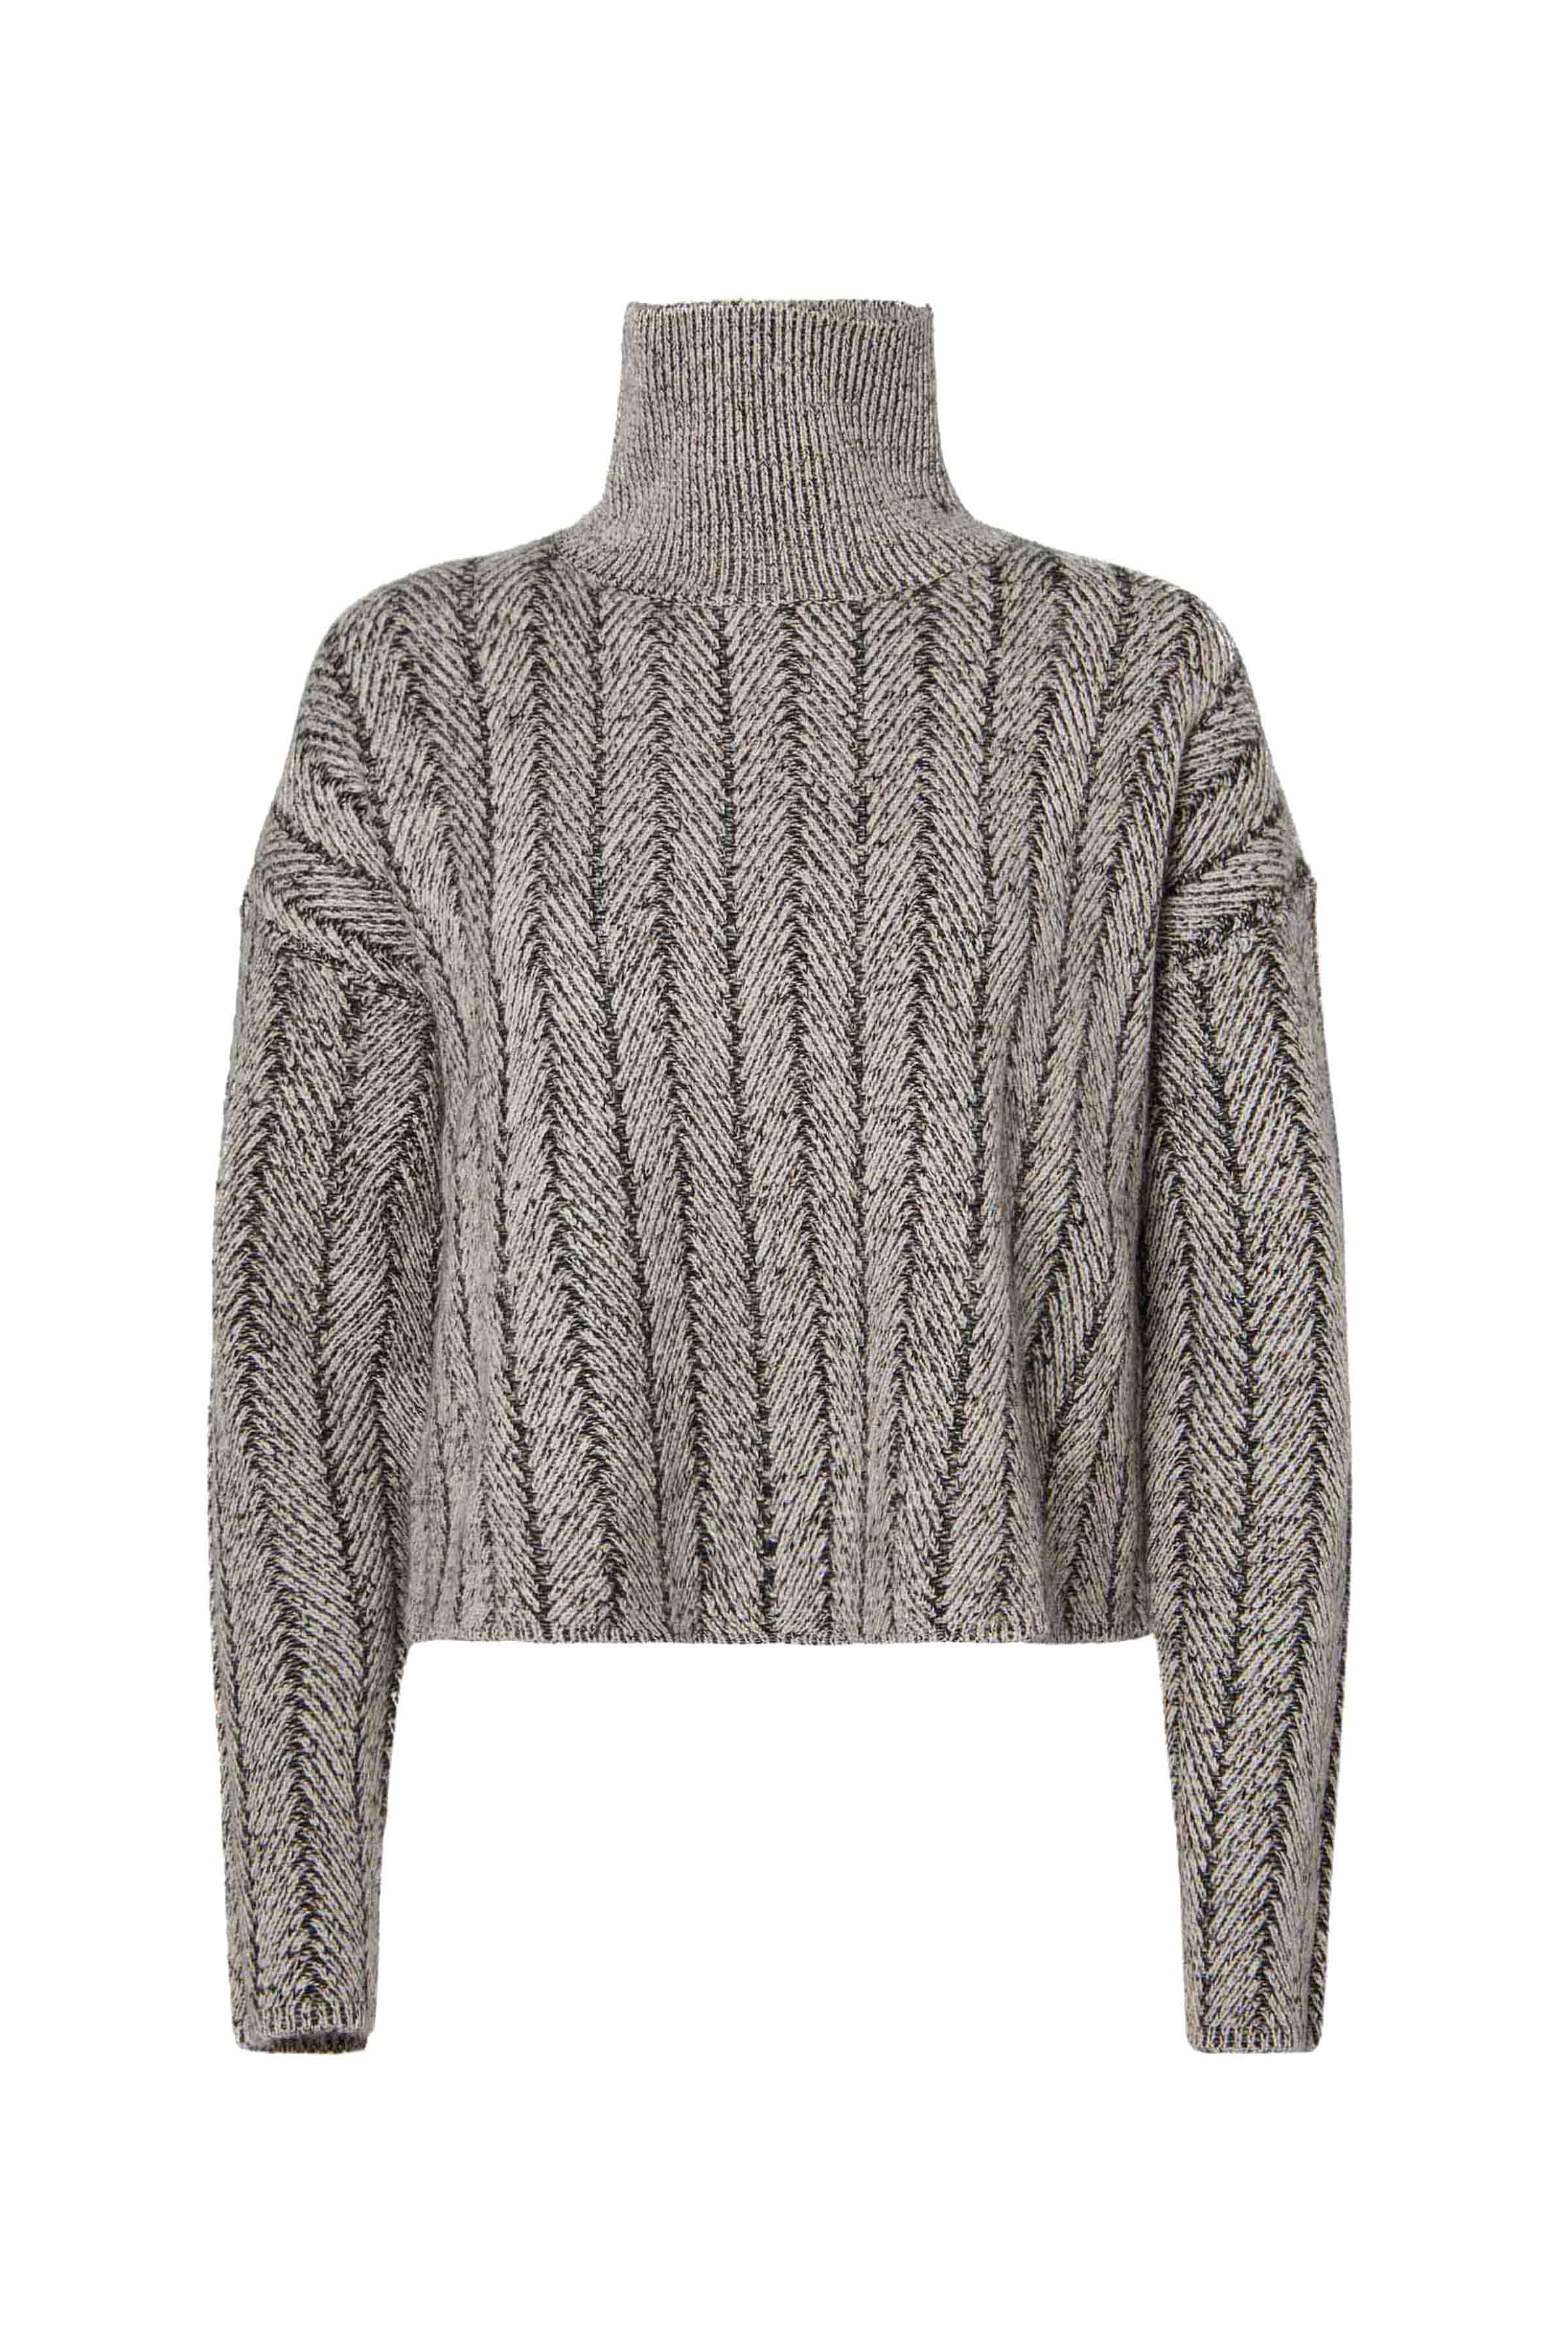 'TERENCE' SWEATER - 1